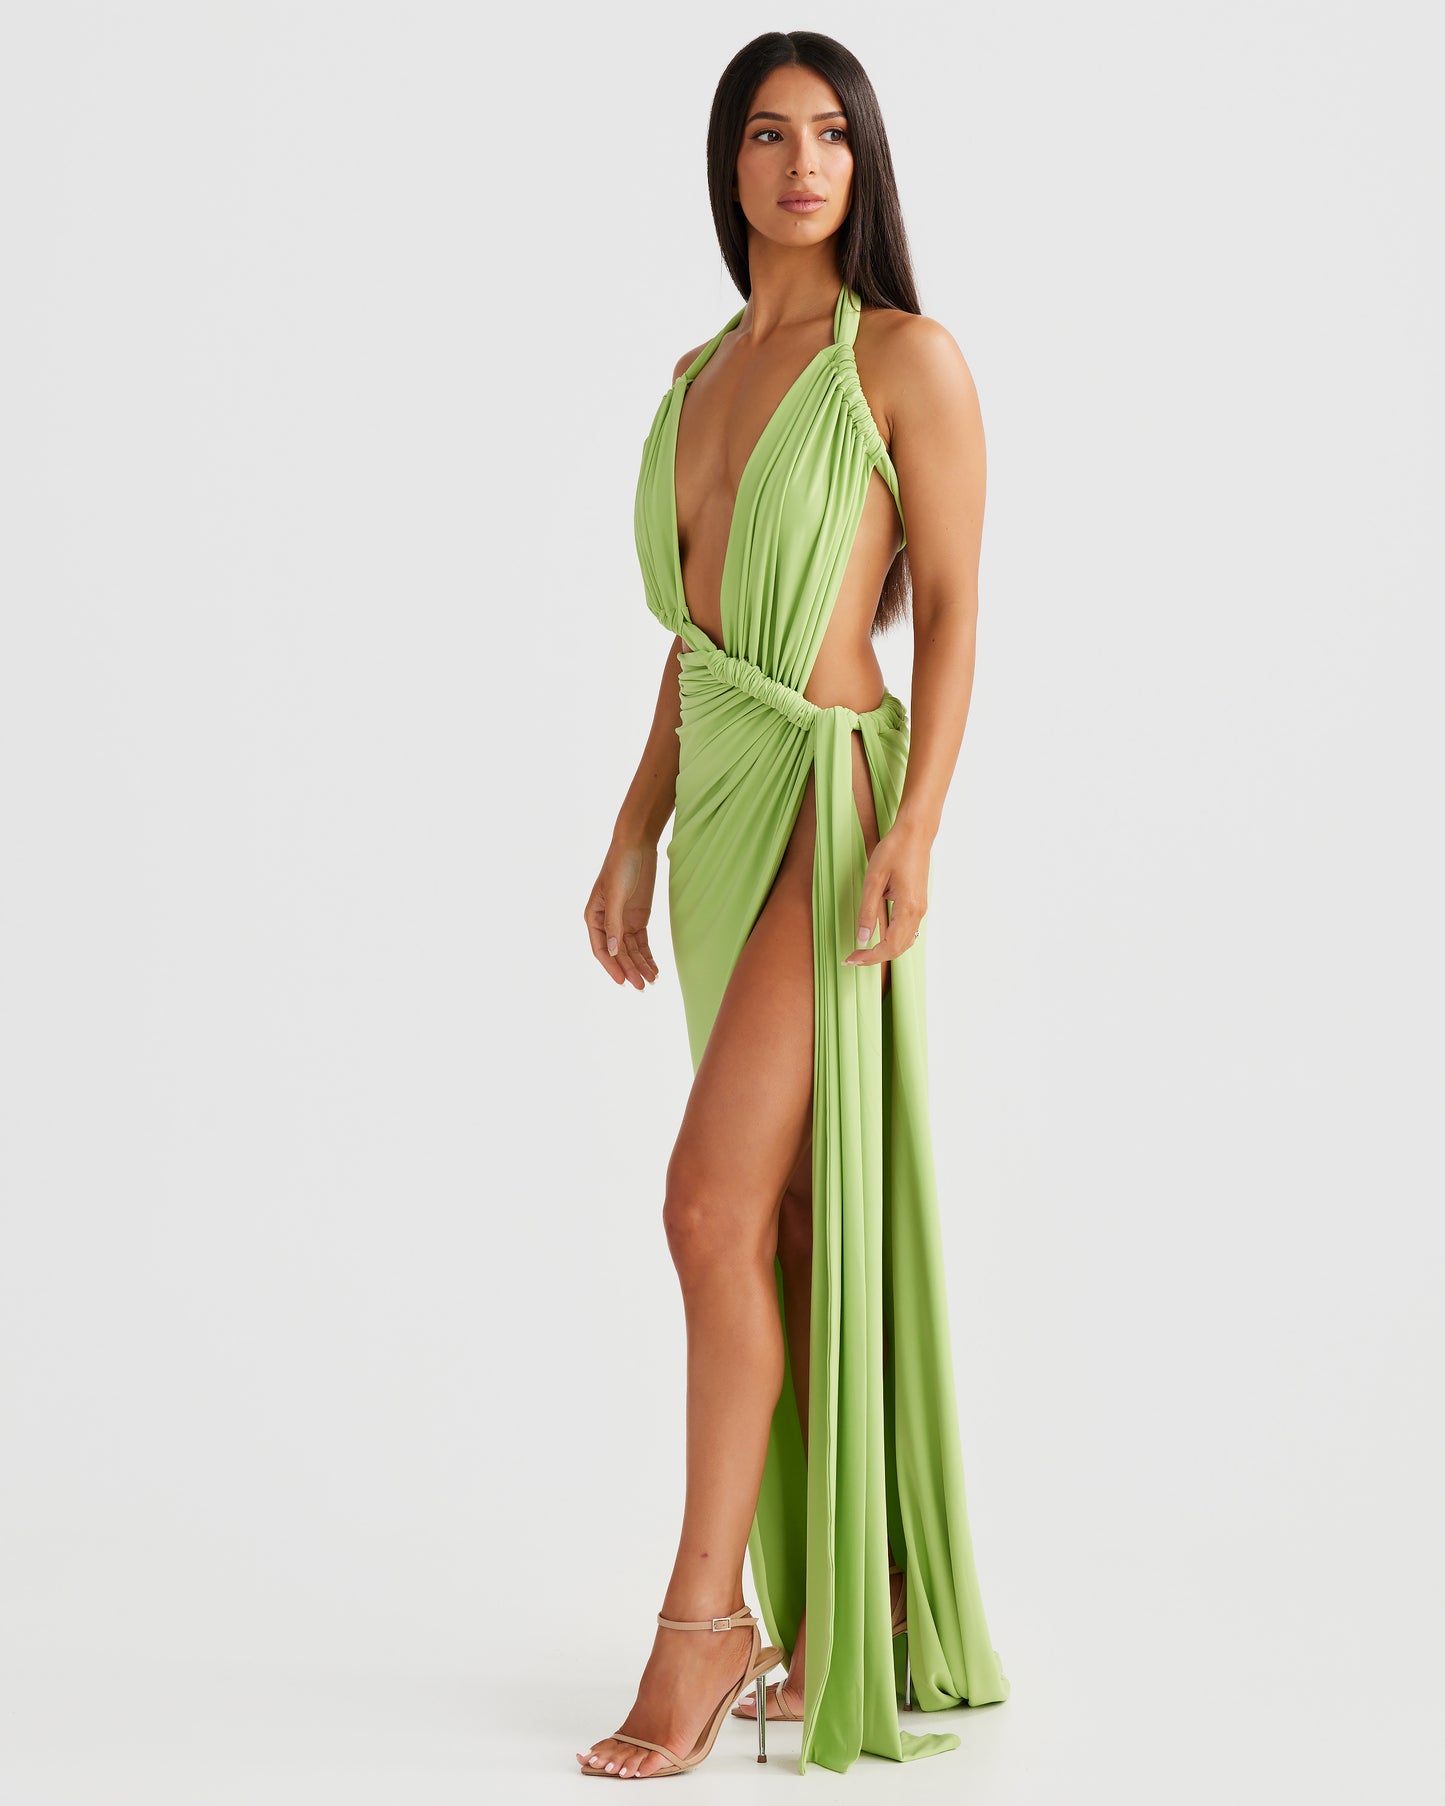 KAILANI GOWN - LIME